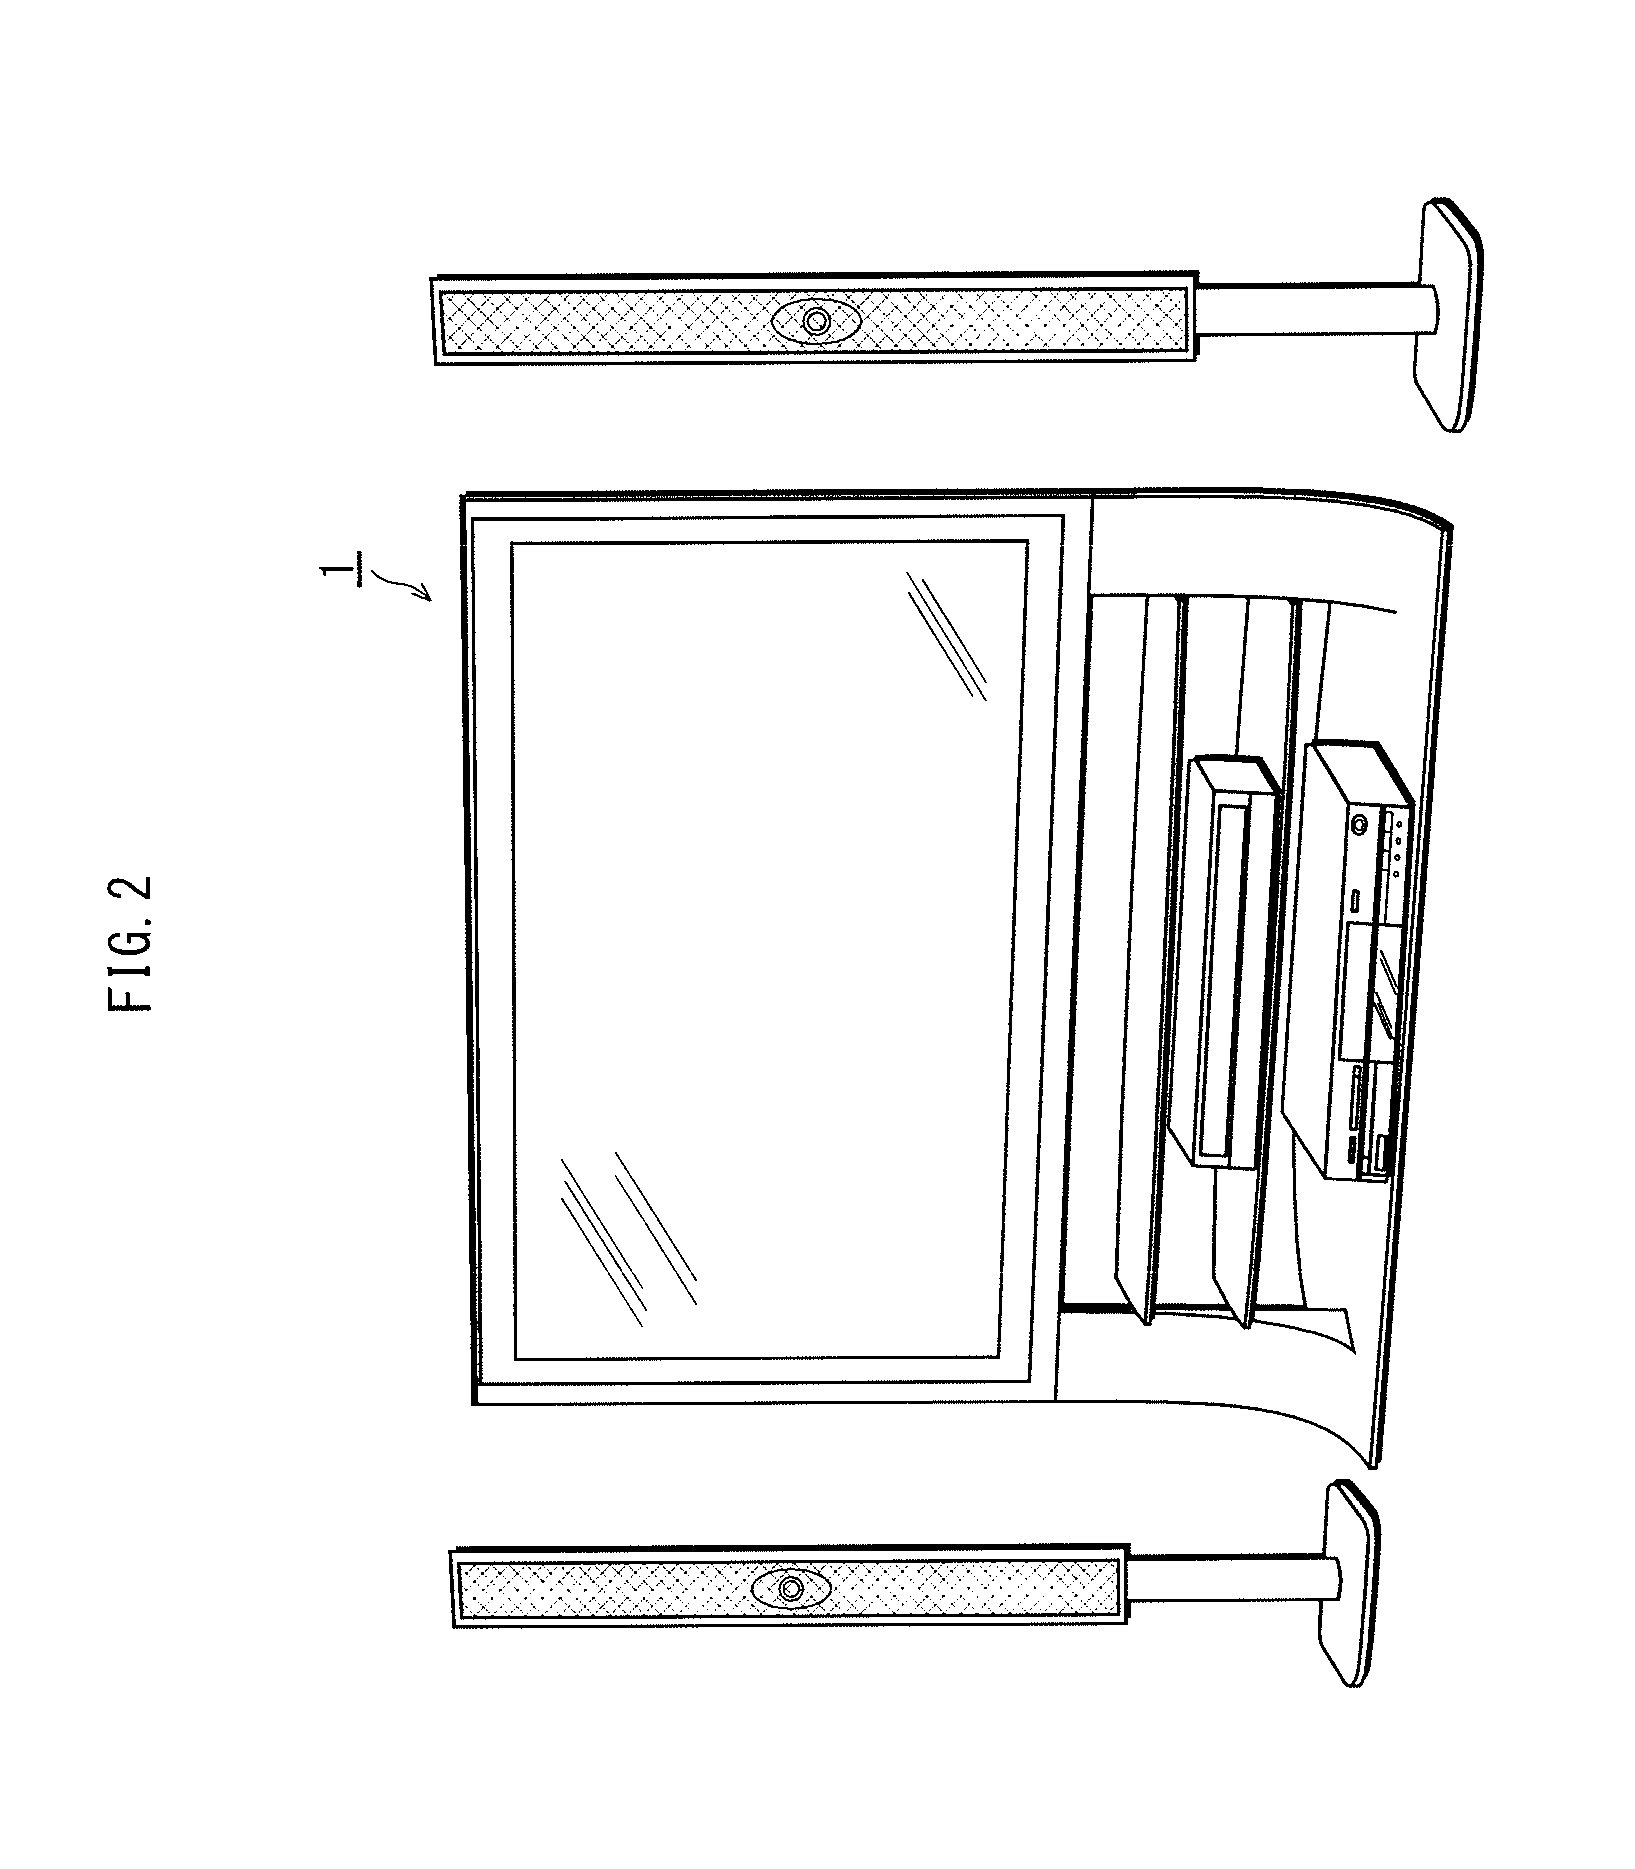 Organic el panel and method for manufacturing same